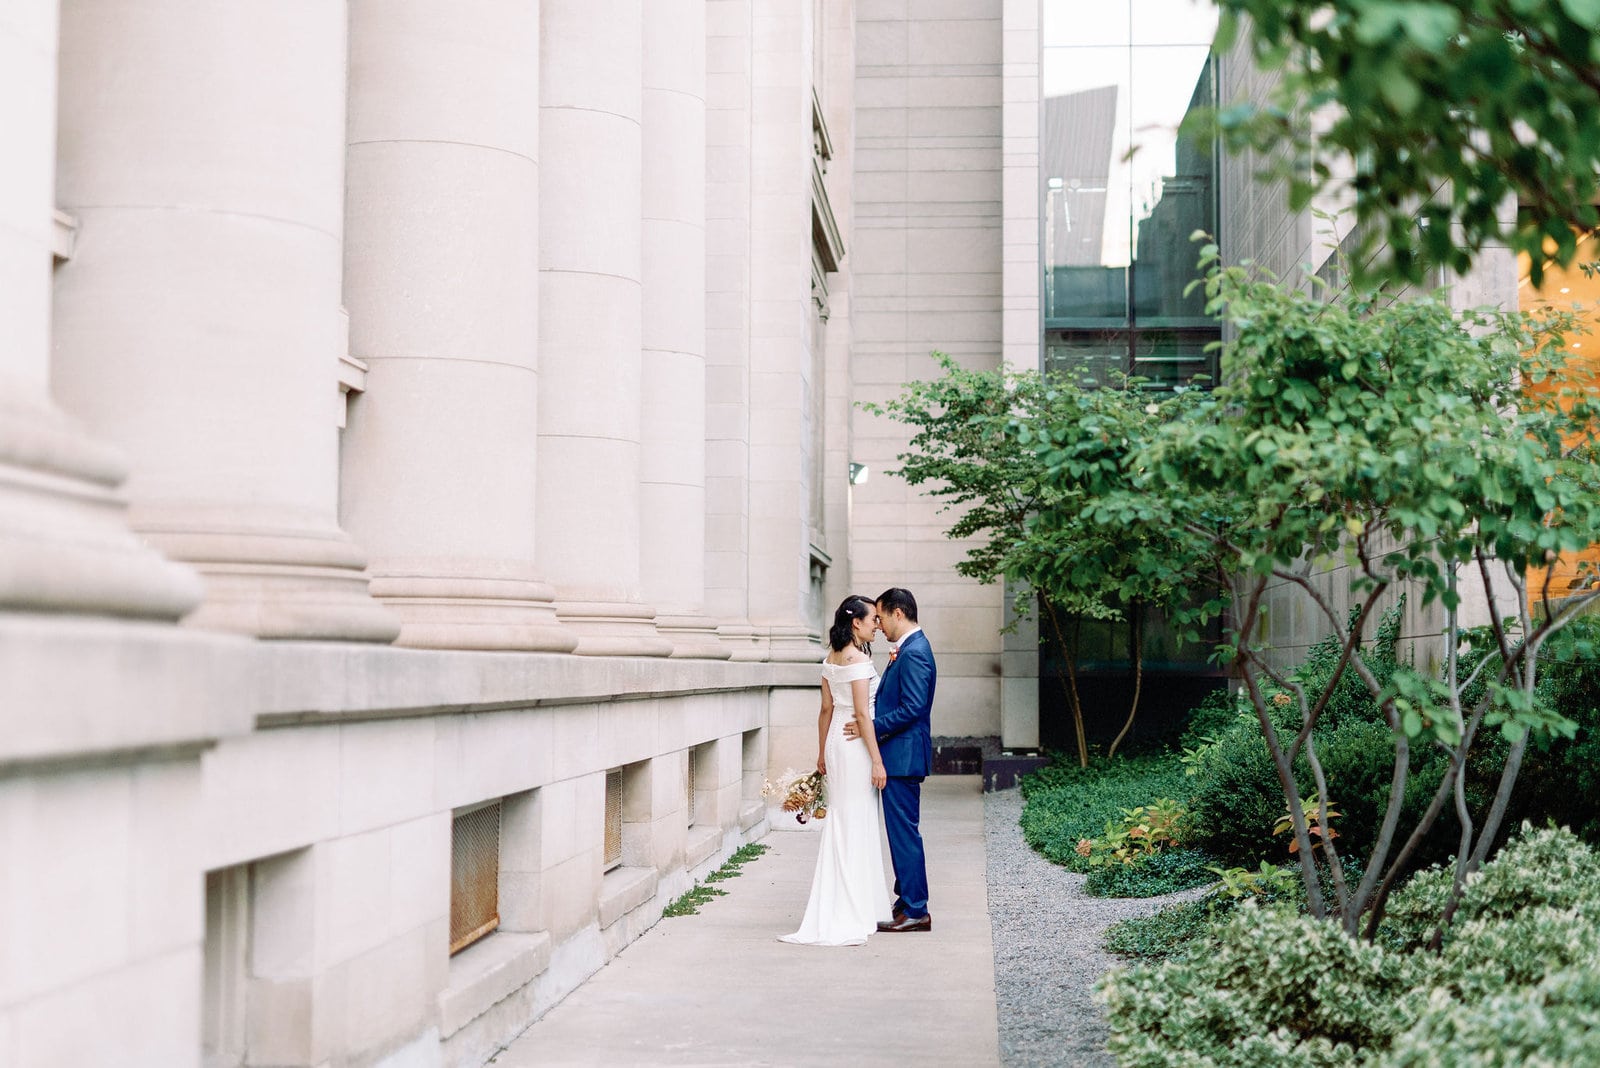 Classic Timeless Editorial bride and groom portraits at gardiner museum downtown toronto modern romantic wedding jacqueline james photography